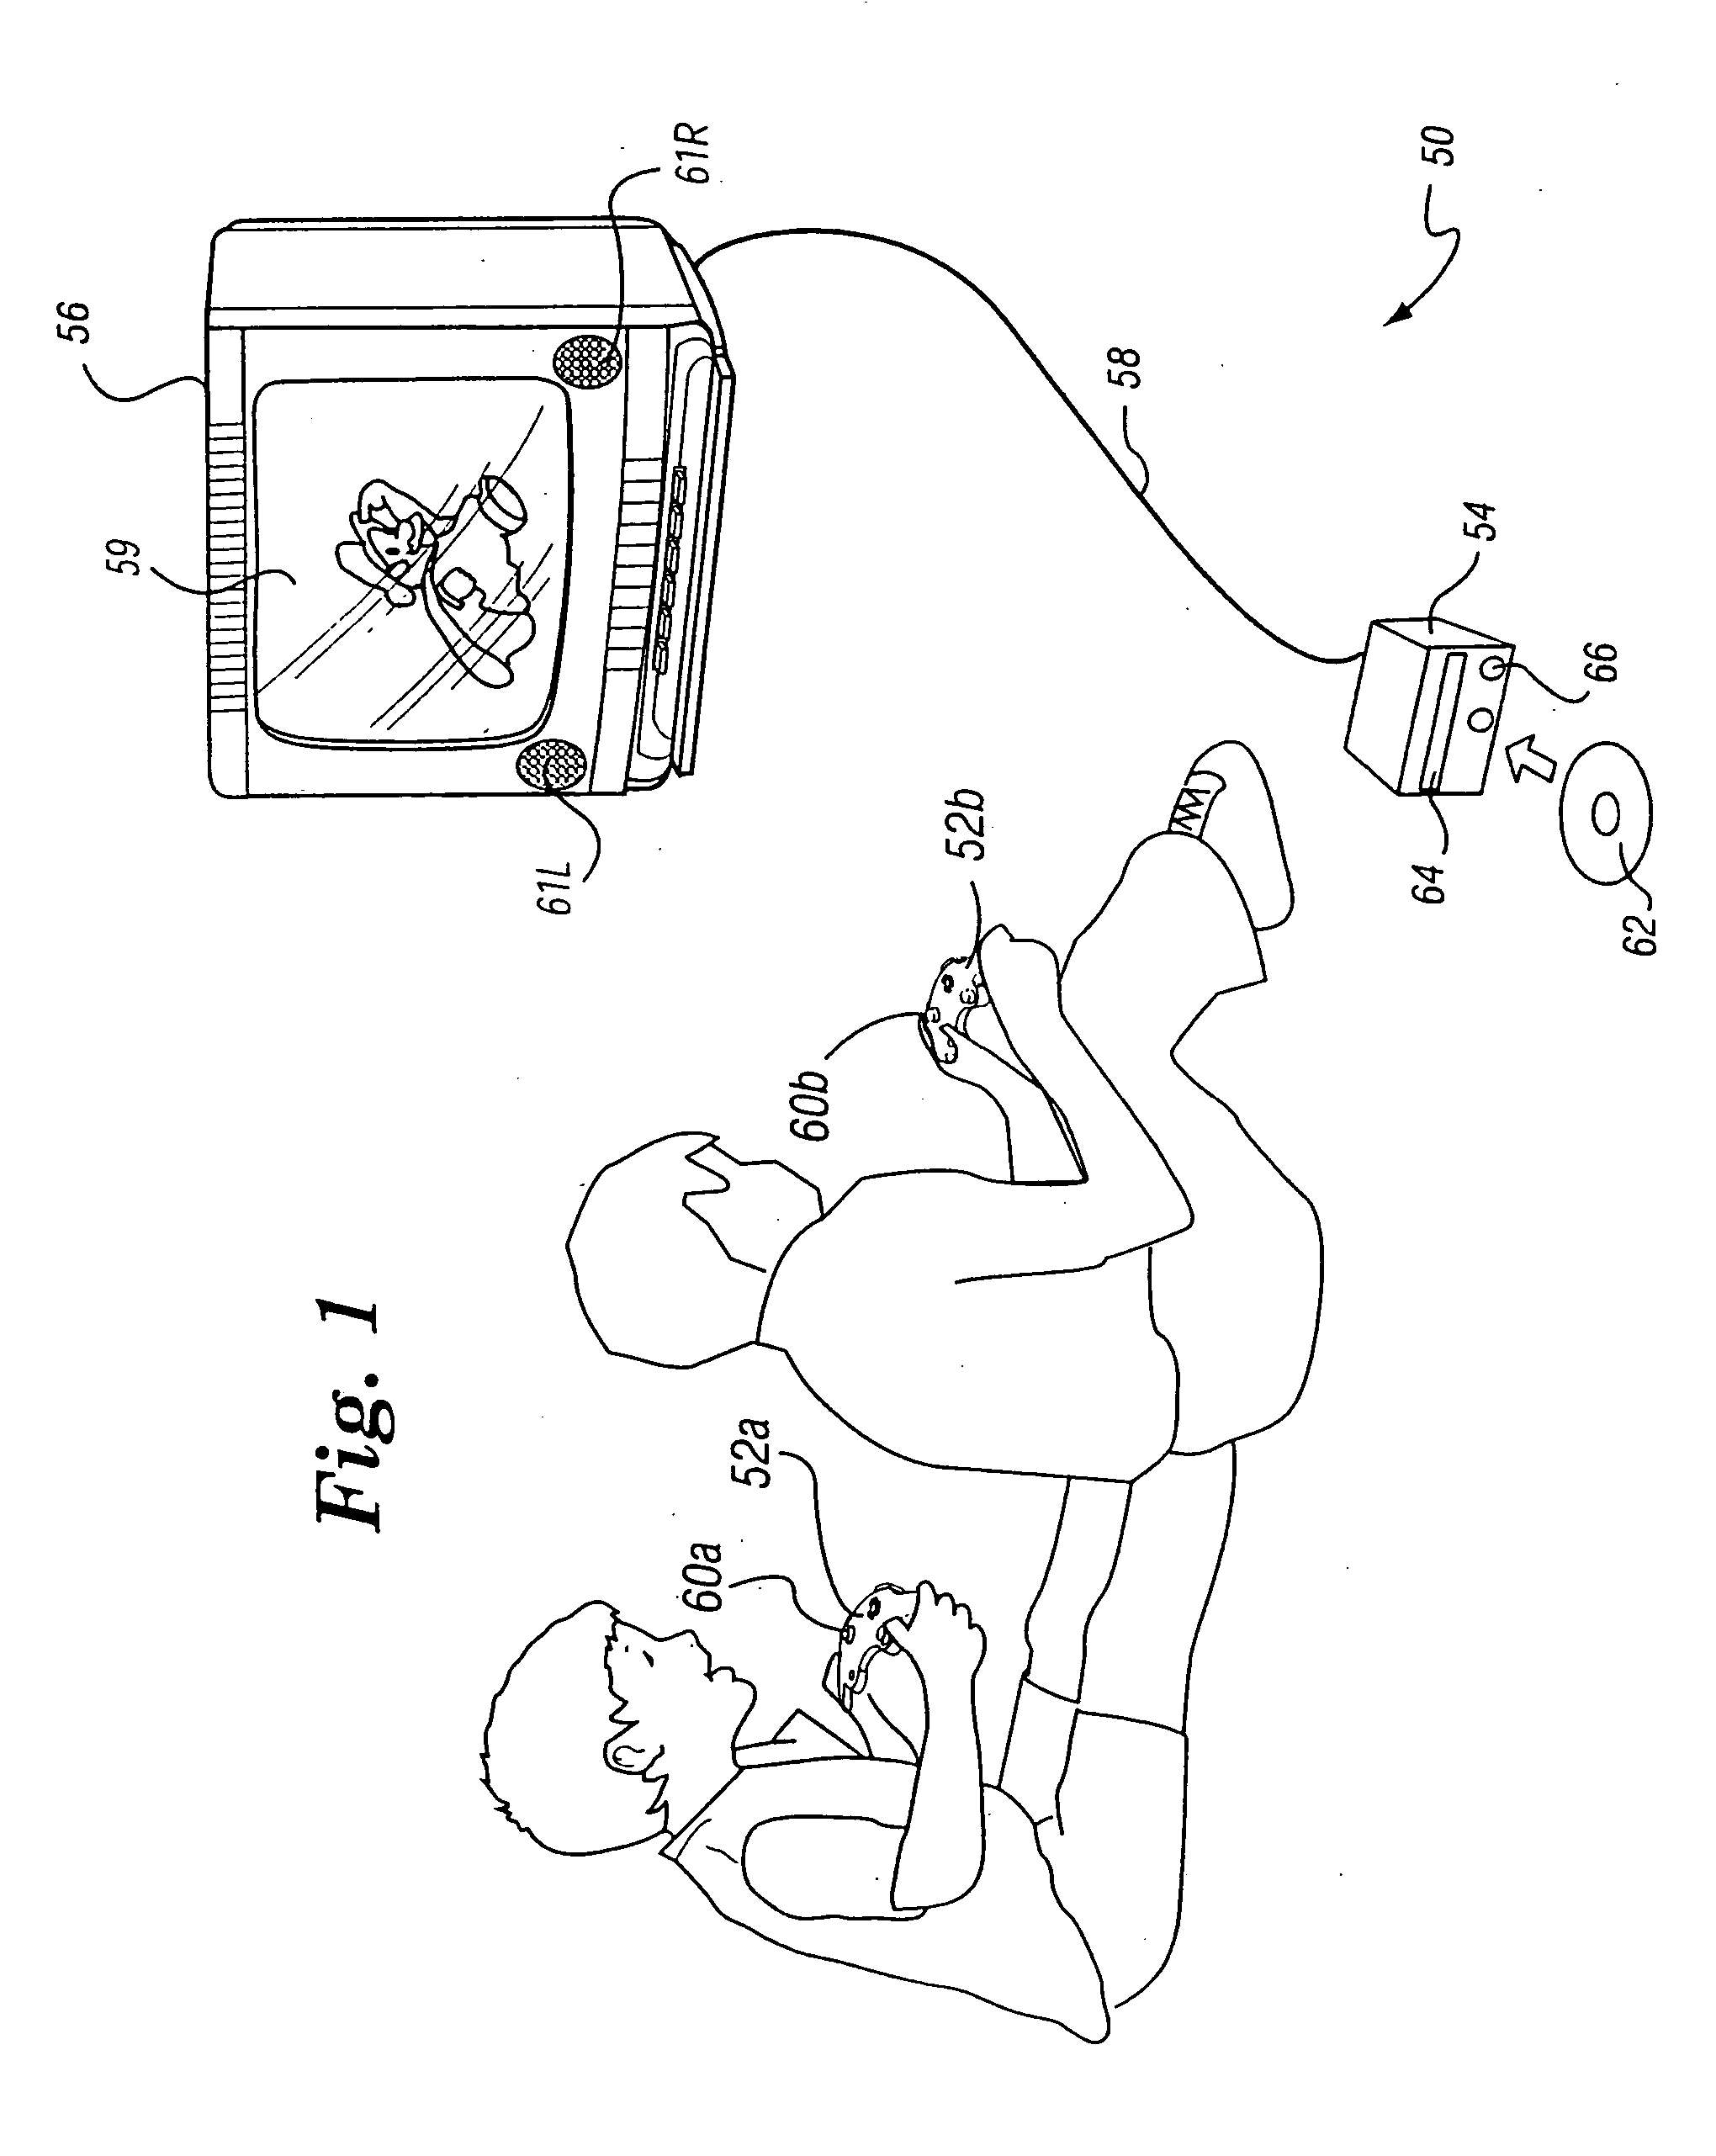 Method and apparatus for efficient generation of texture coordinate displacements for implementing emboss-style bump mapping in a graphics rendering system